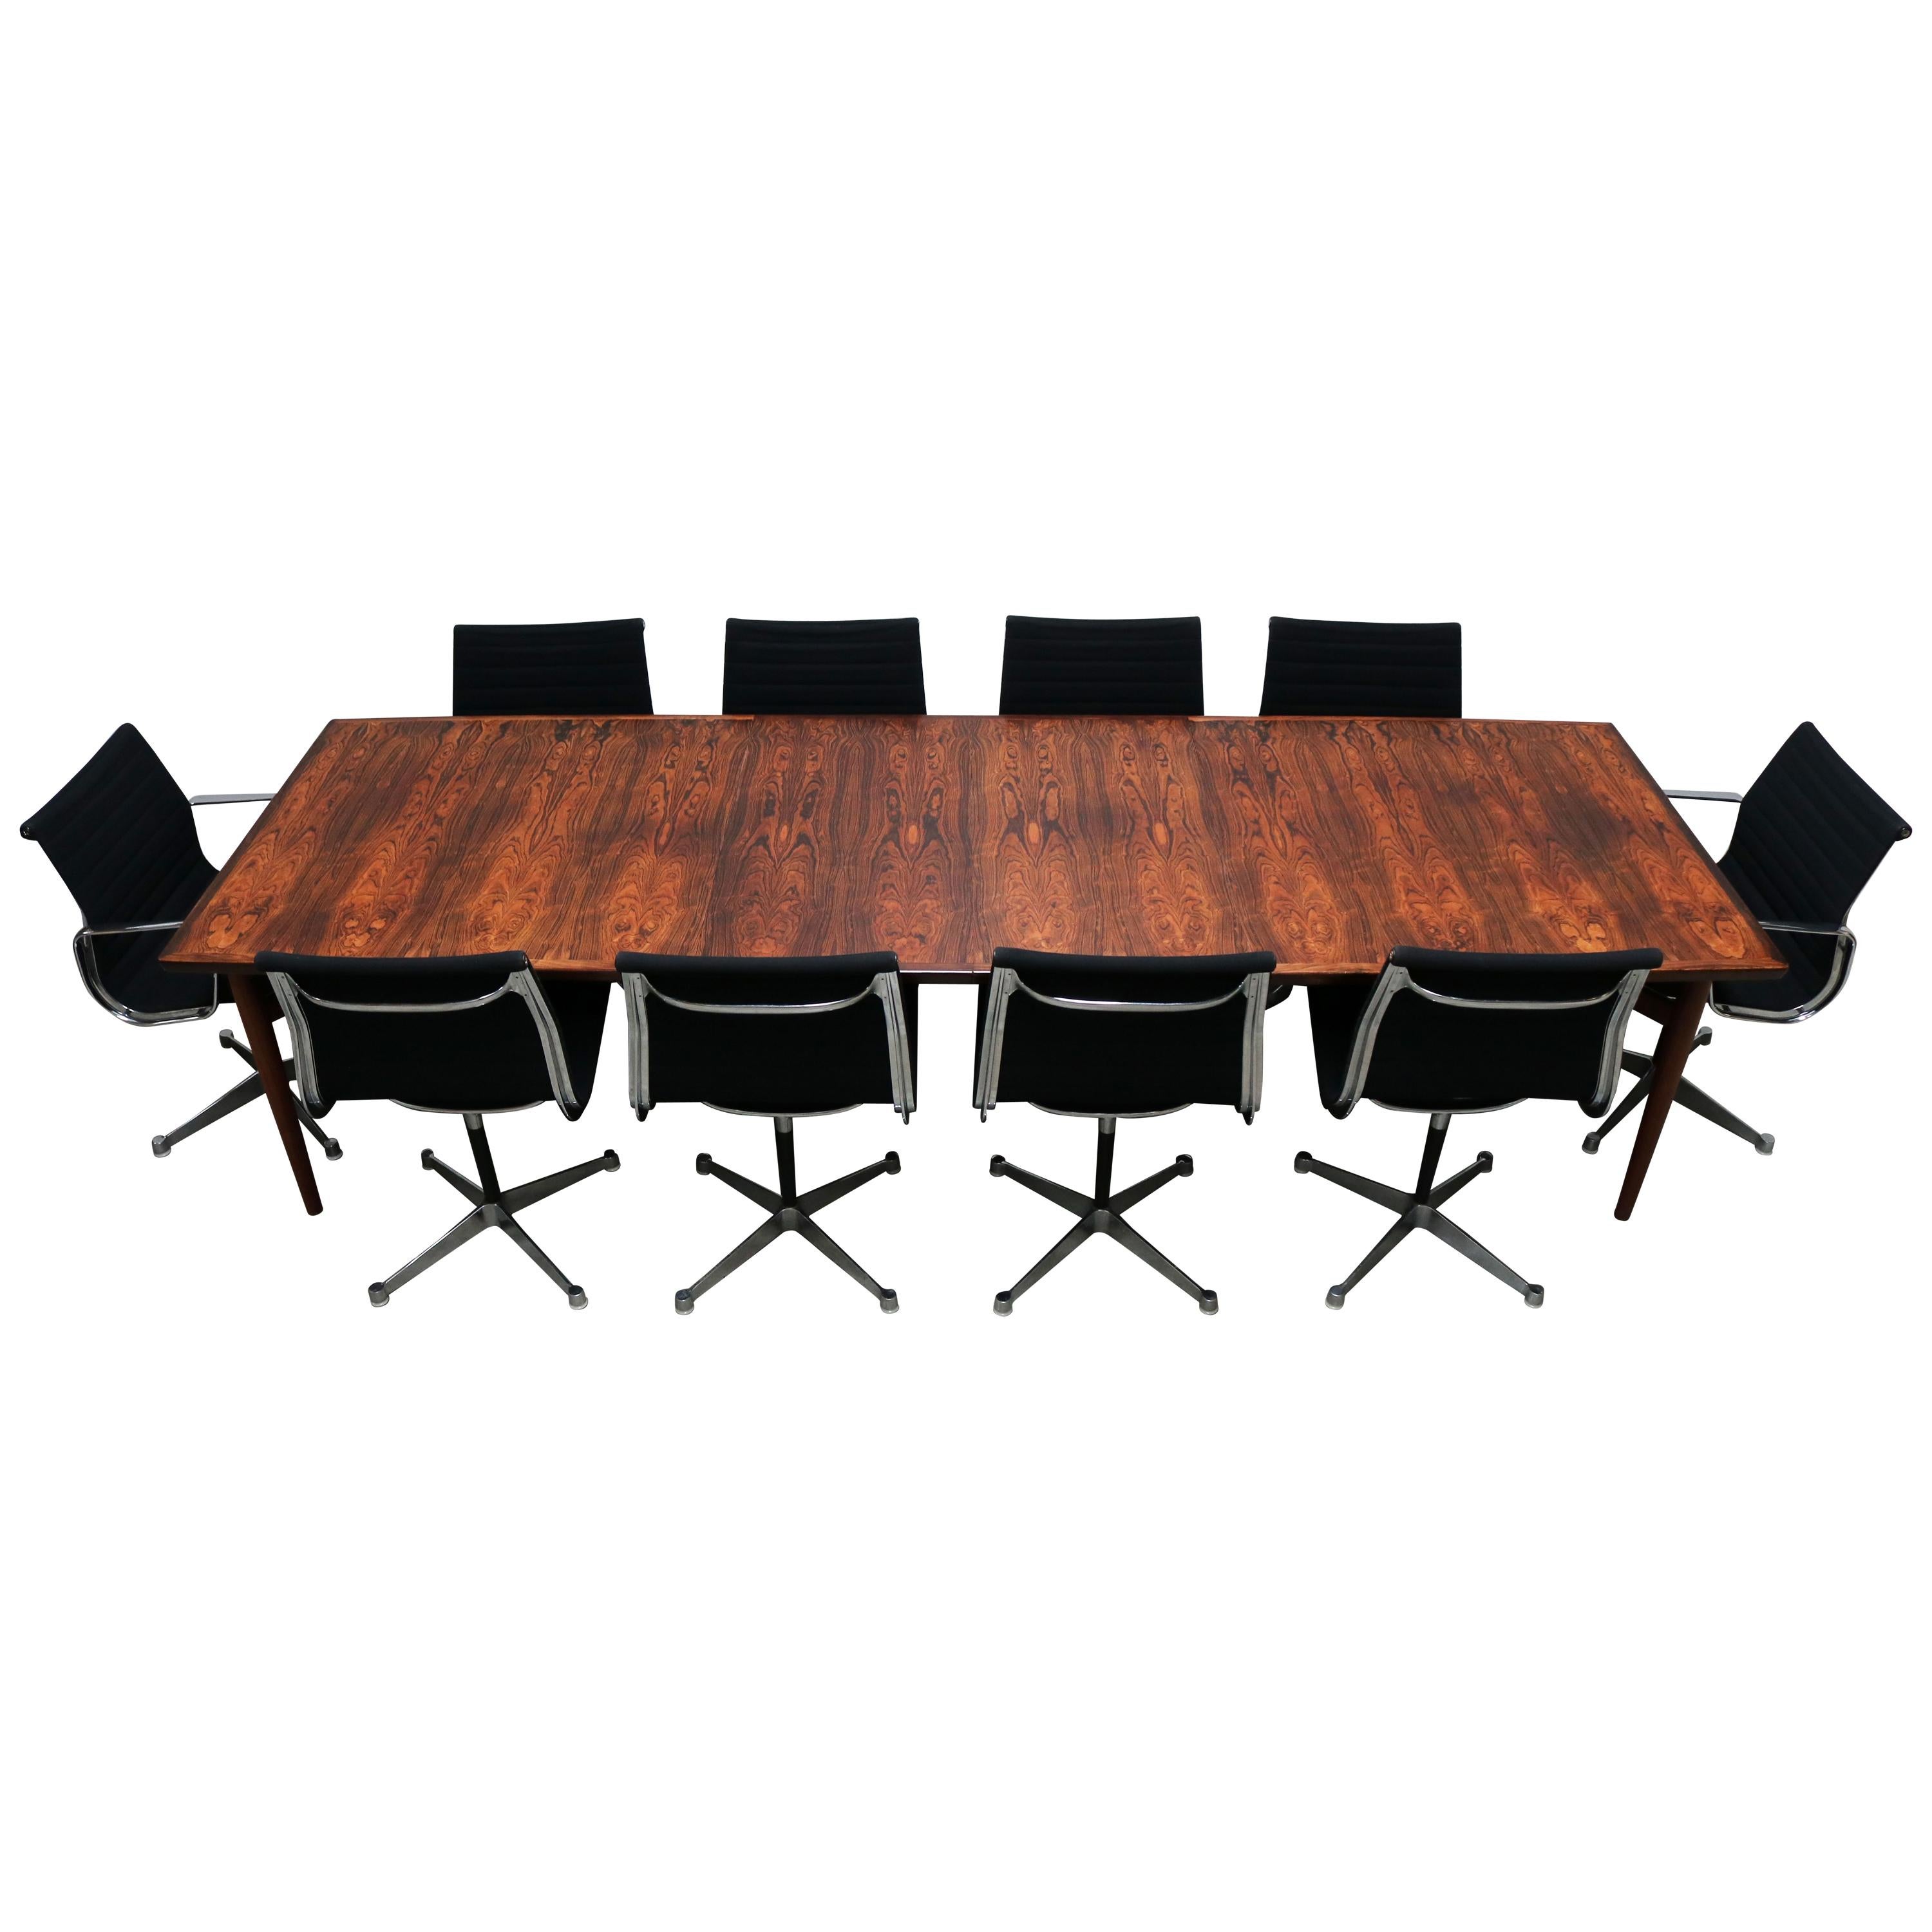 Large Conference or Dining Table by Arne Vodder for Sibast in Rosewood, 1950s